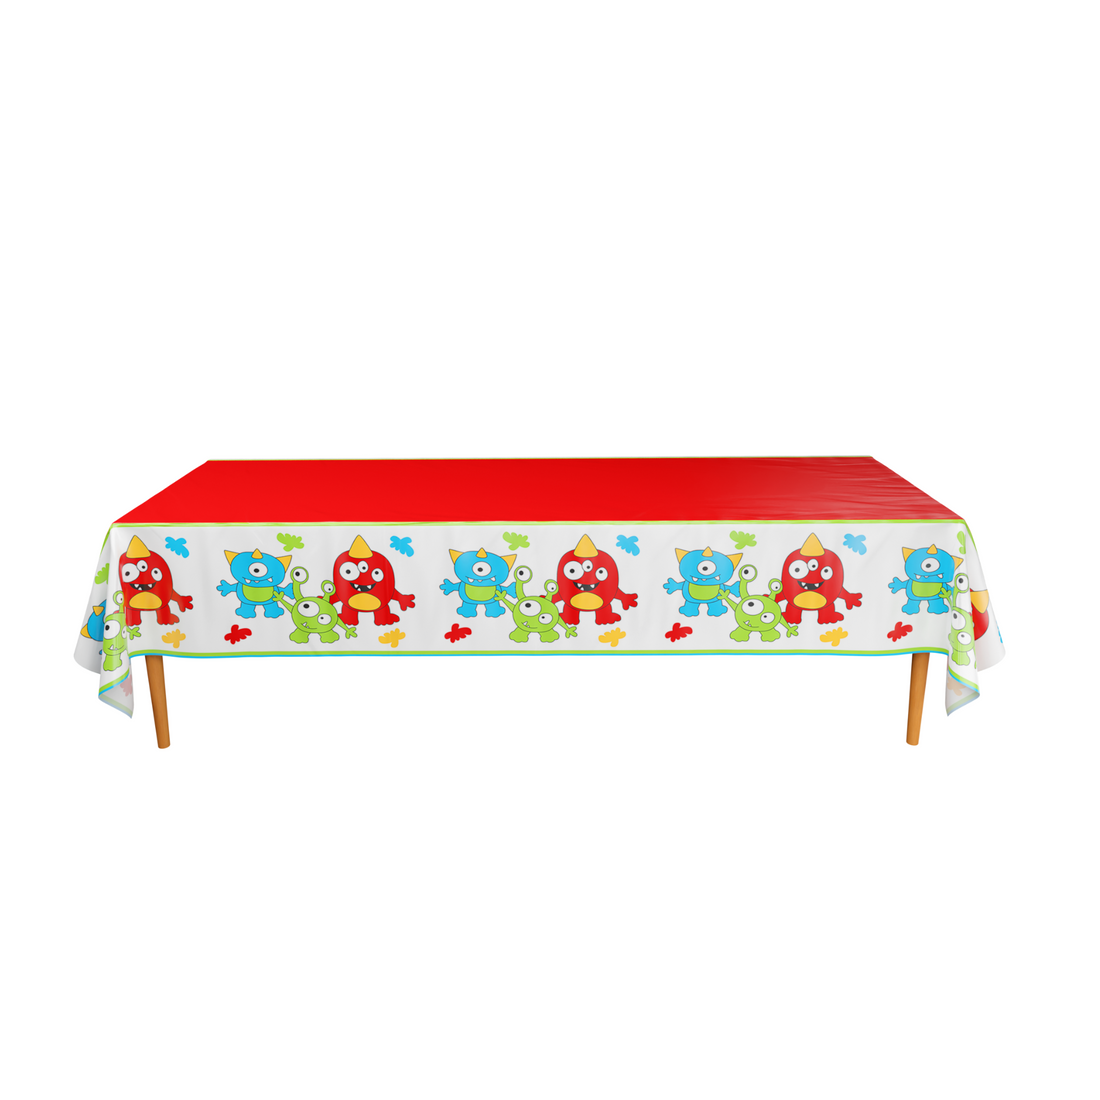 Let Your Little Monsters Party with Discount Party Supplies Monster Table Covers!